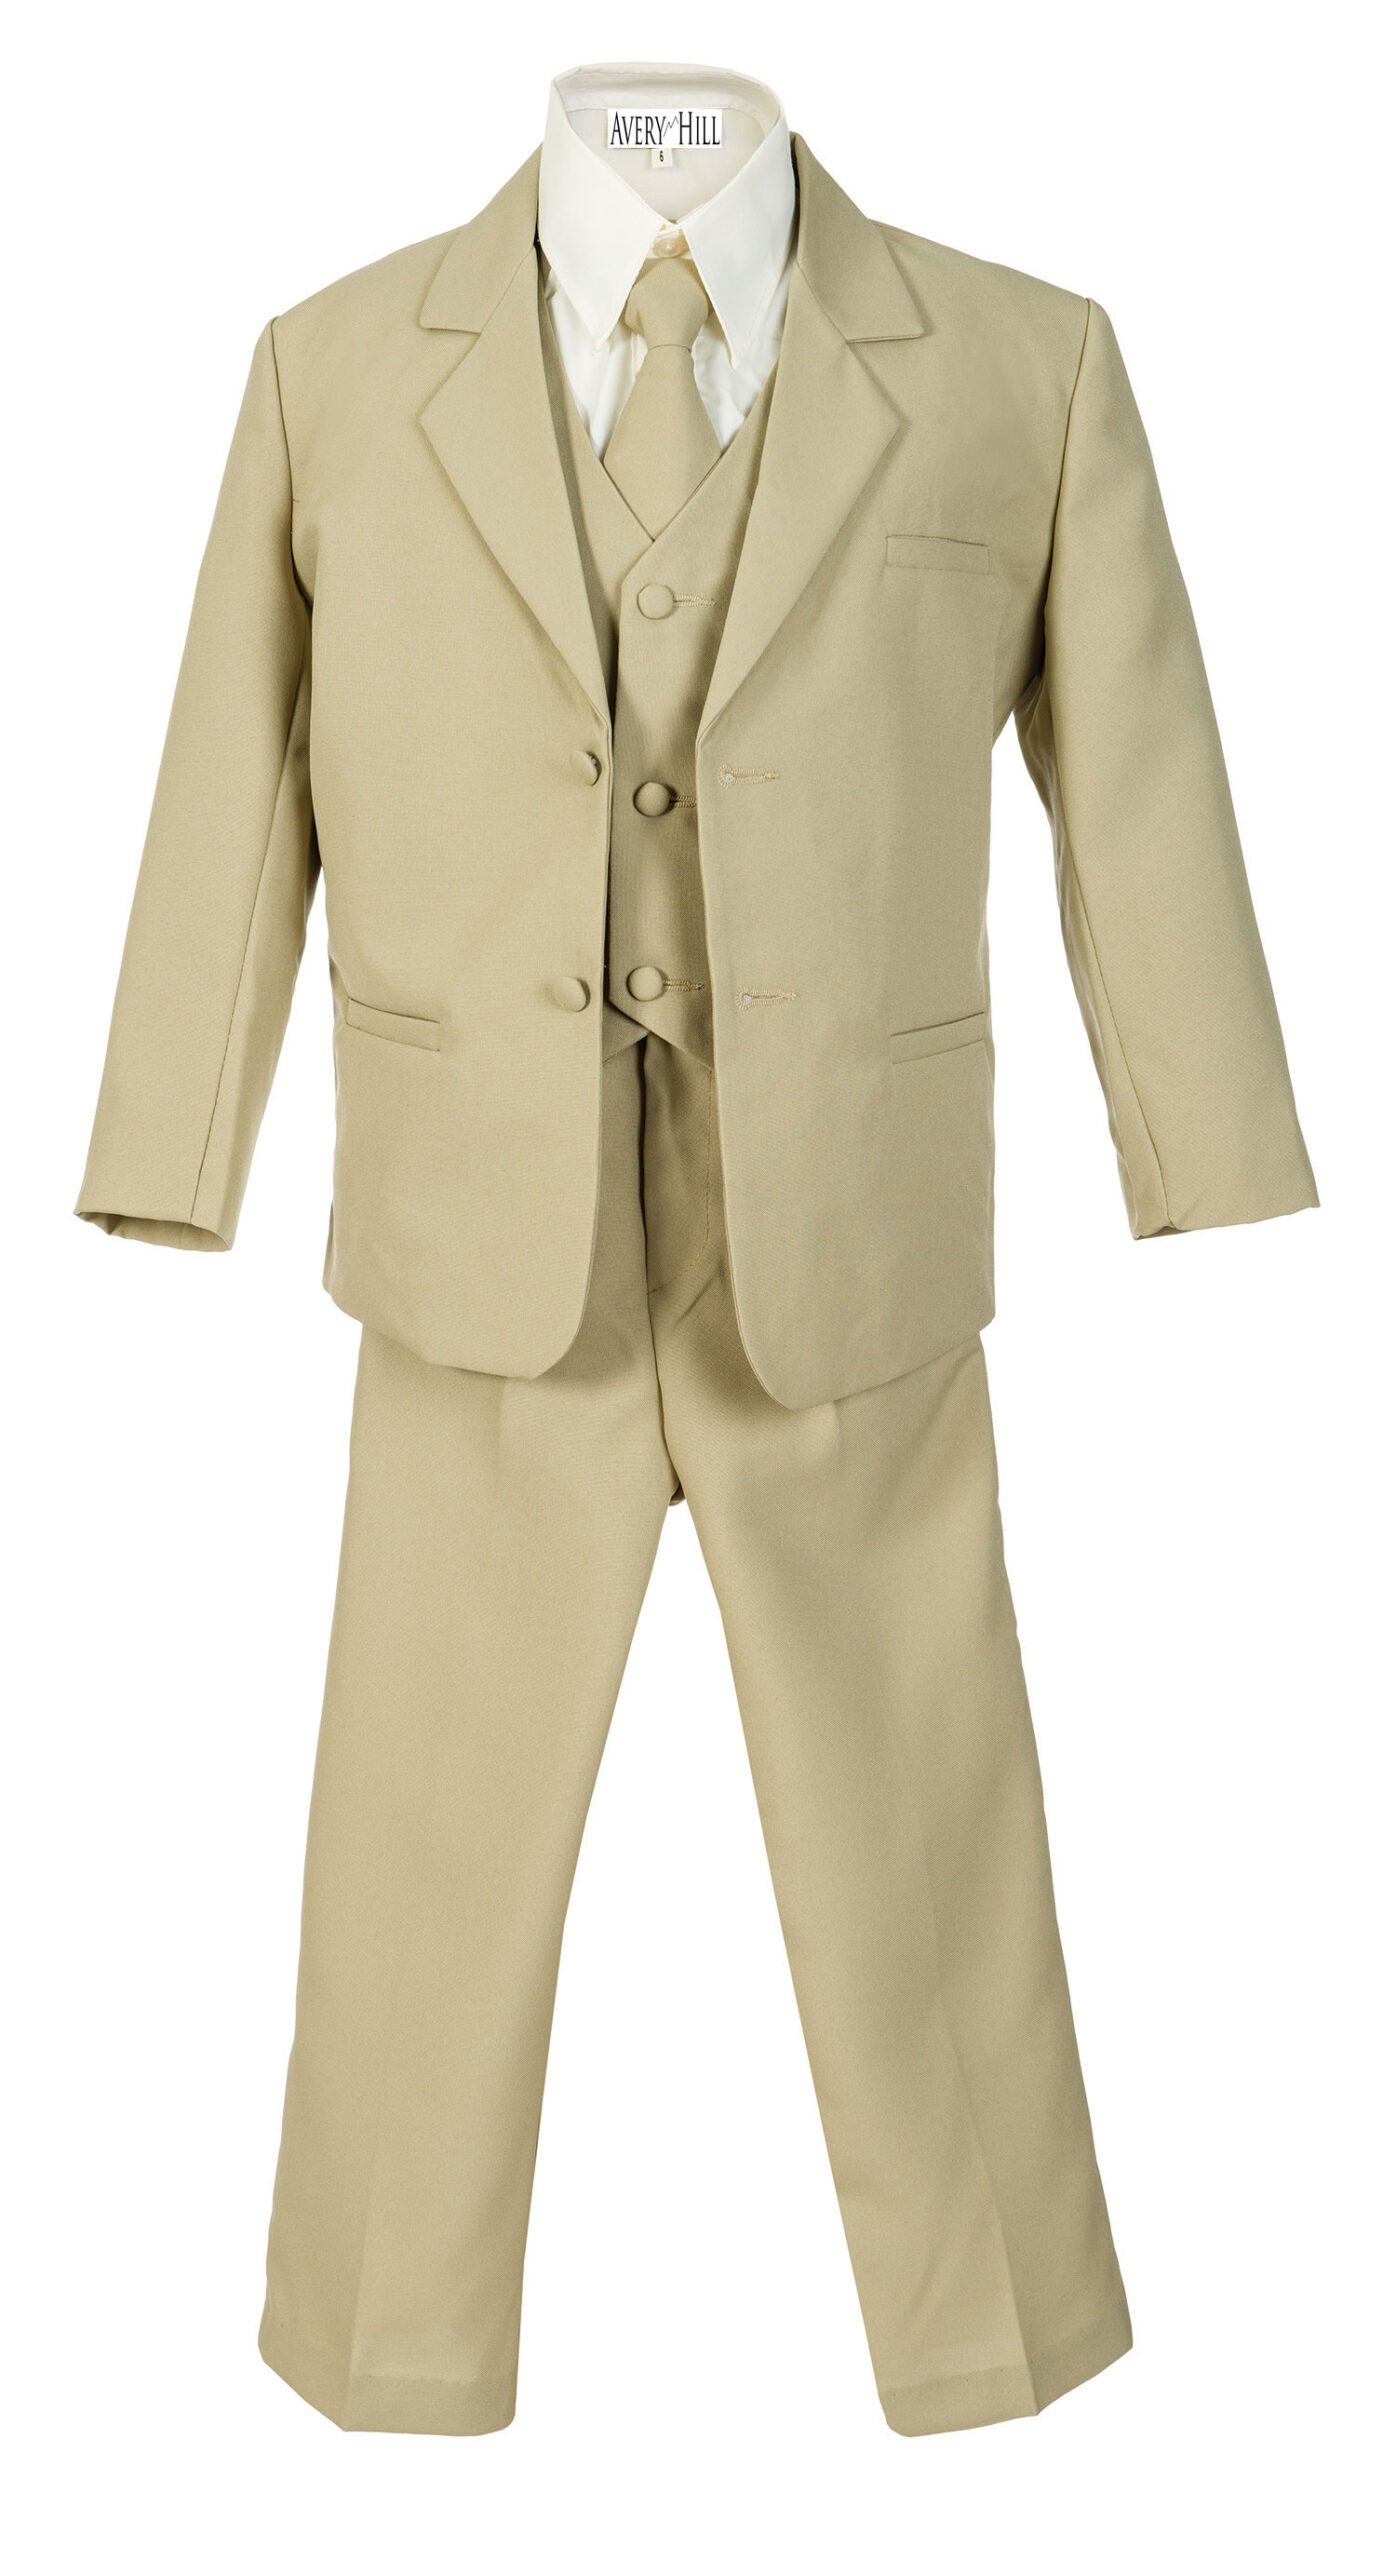 Avery Hill Boys Formal 5 Piece Suit with Shirt and Vest Khaki - 14